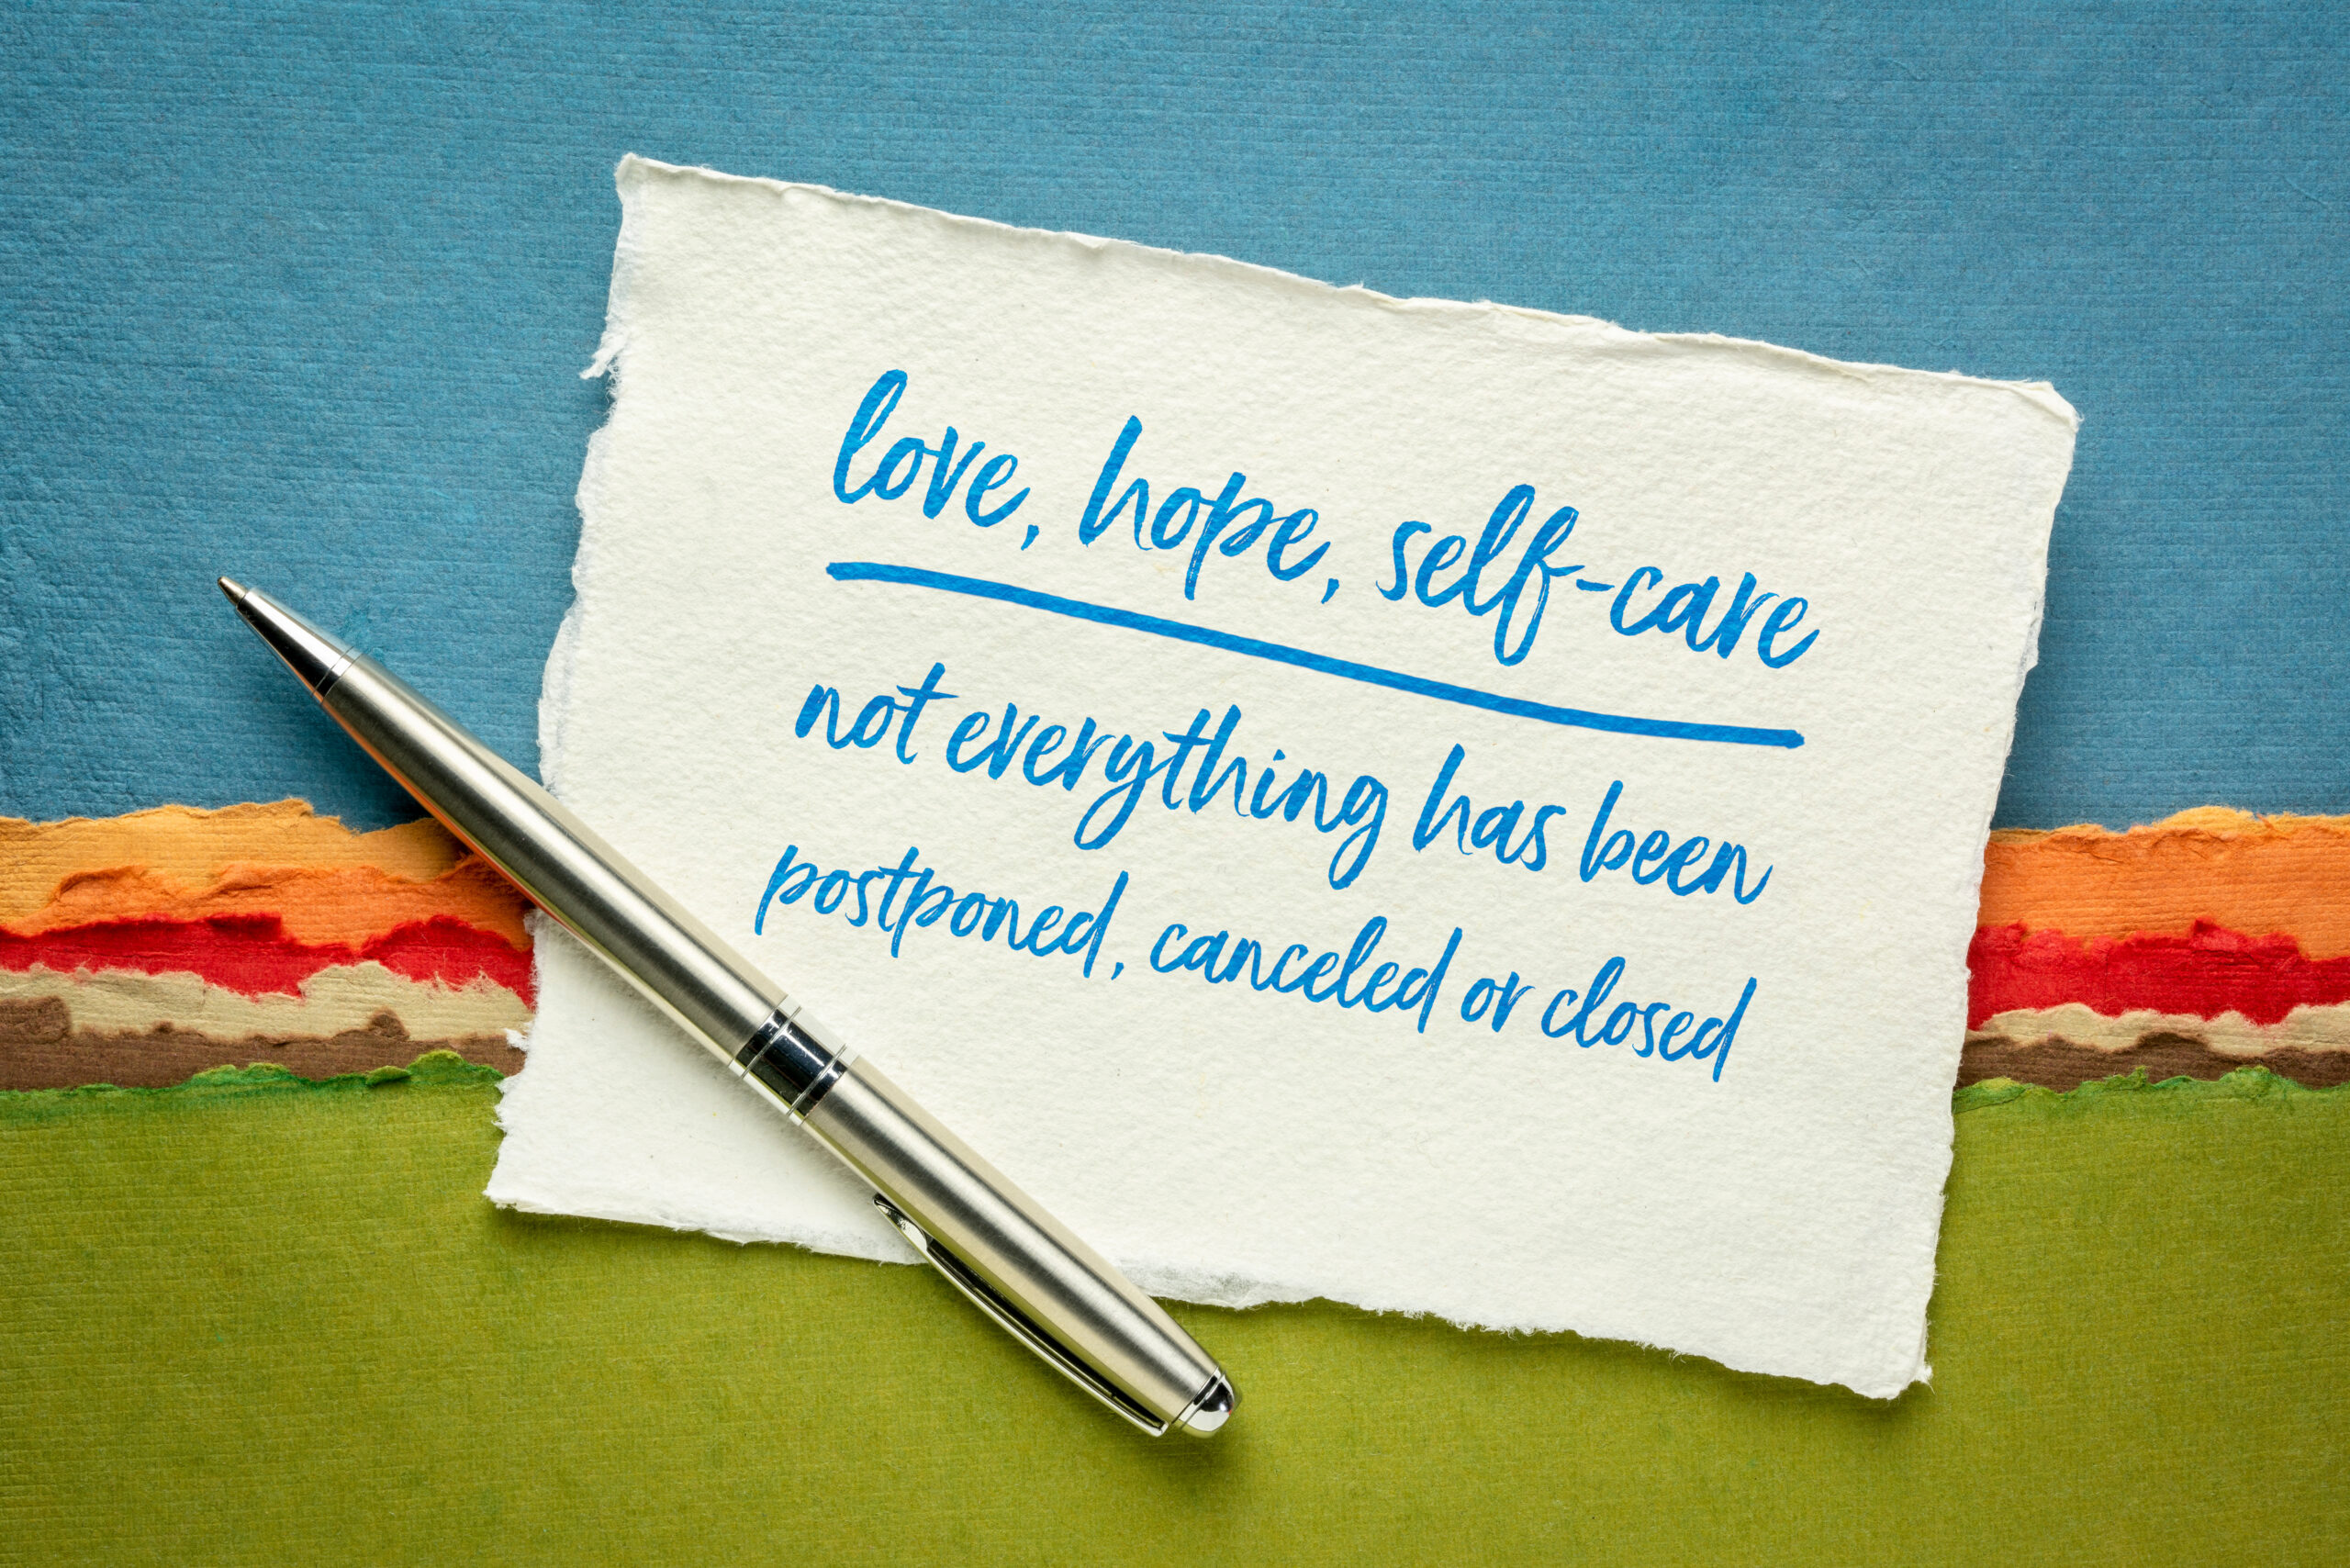 love, hope, self-care are not canceled